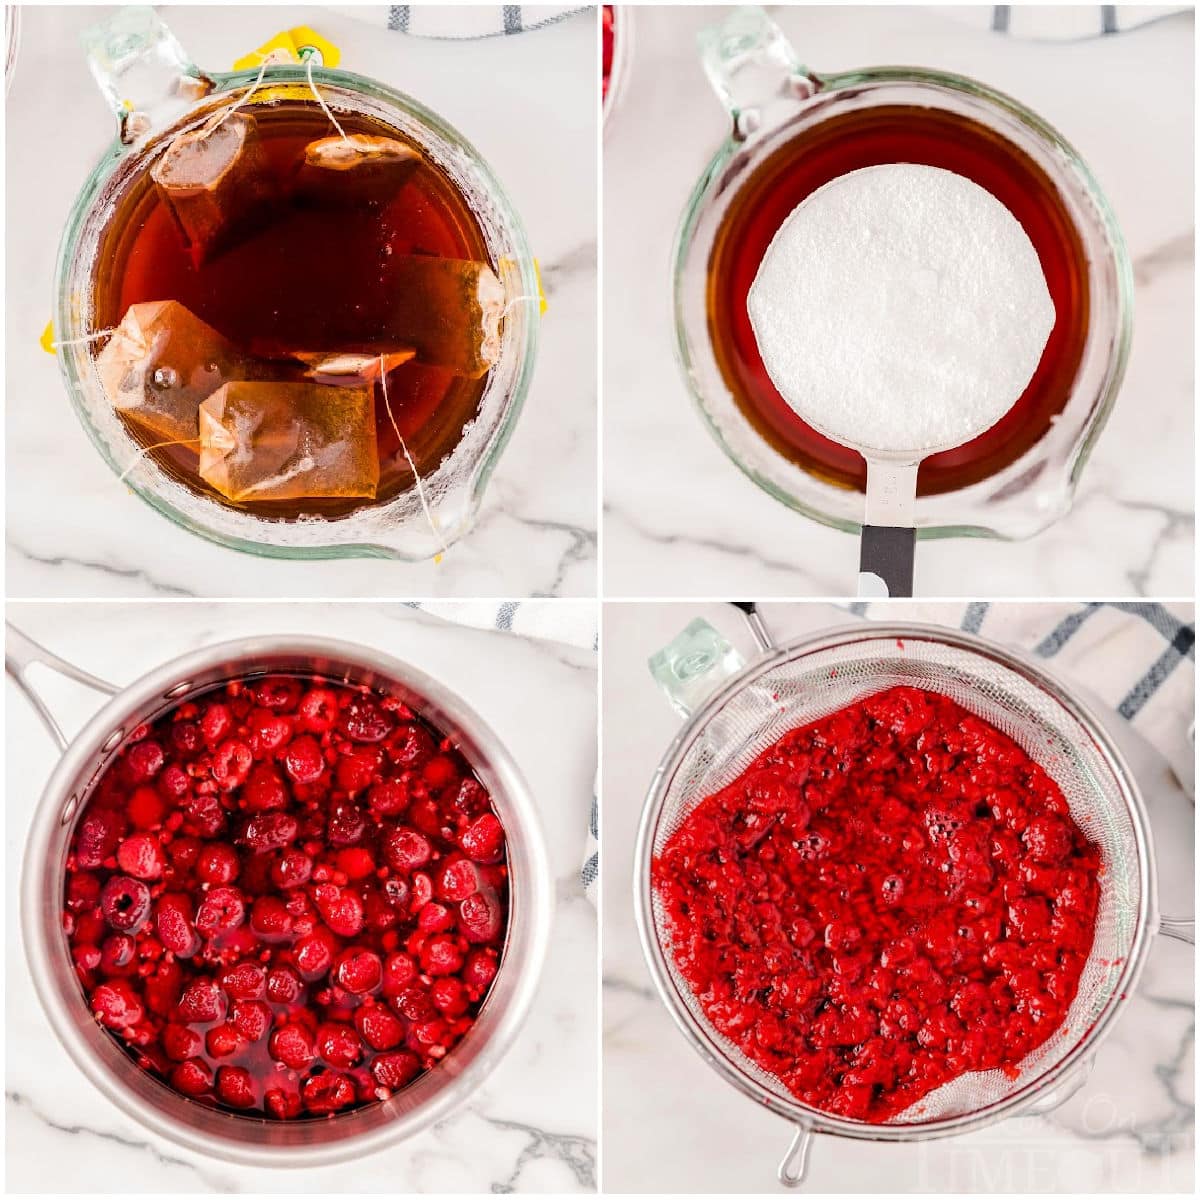 four image collage showing step by step how to make raspberry iced tea.